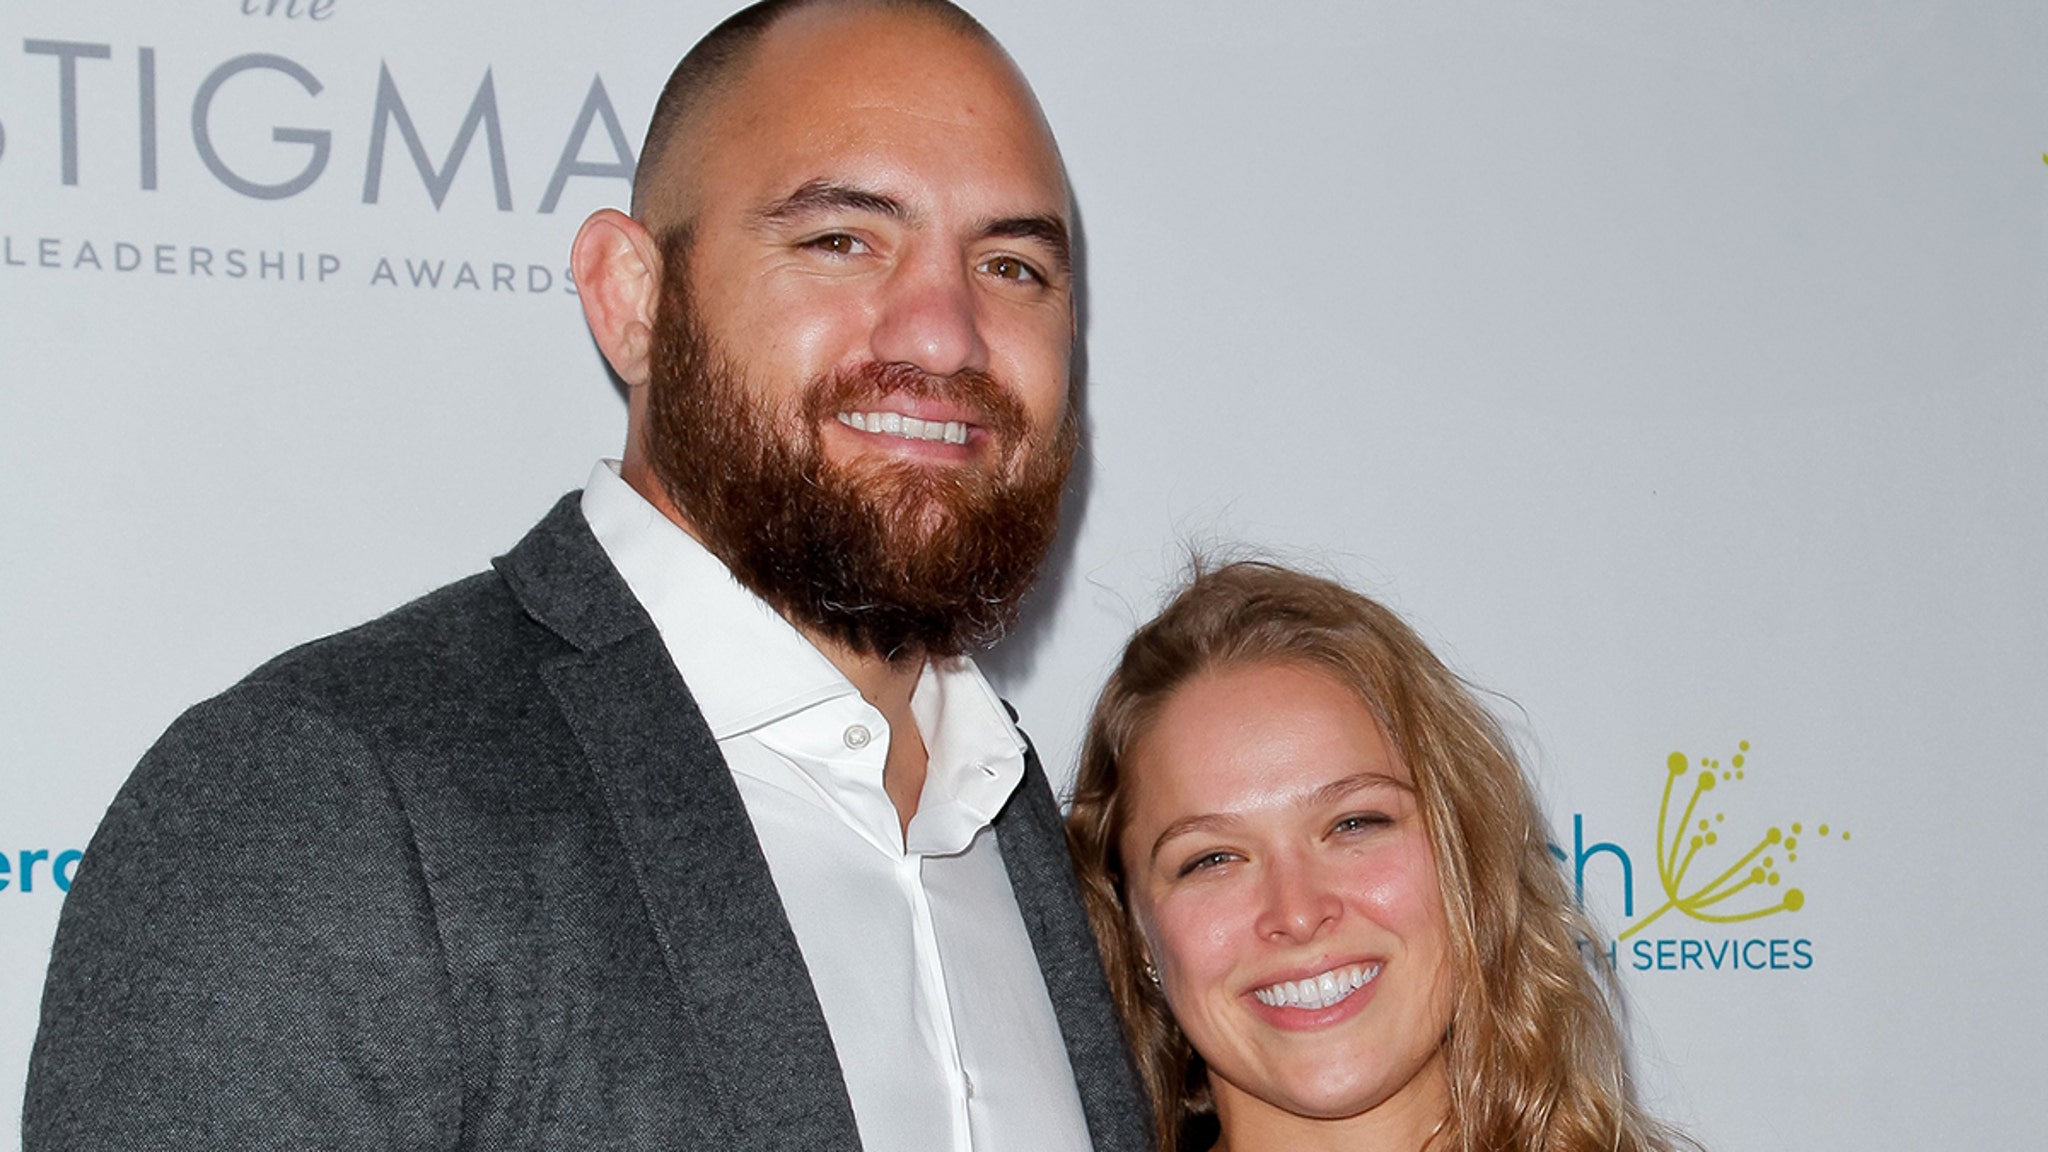 Ronda Rousey Announces She’s Pregnant With Second Child